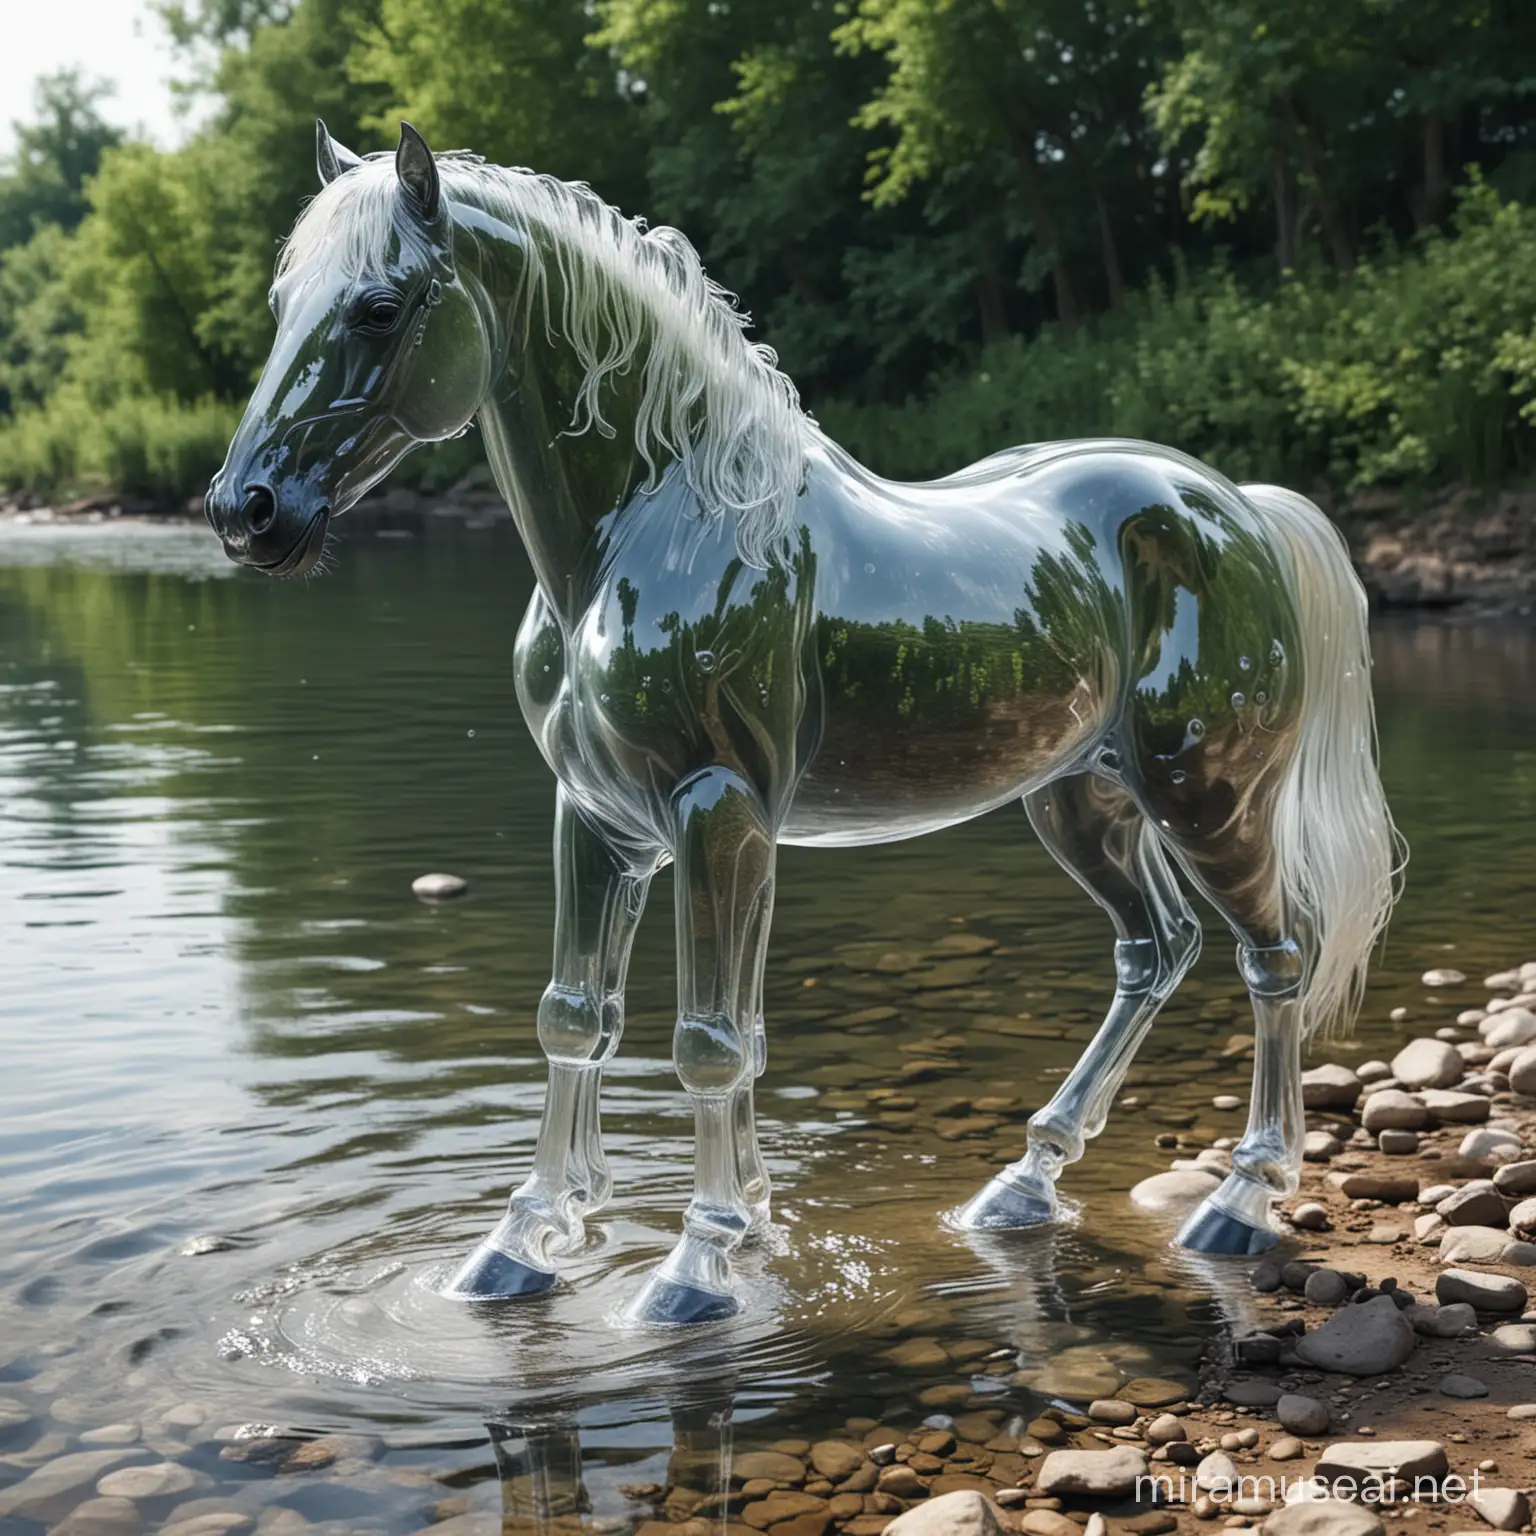 Lifelike Transparent Horse Statue by the Riverside